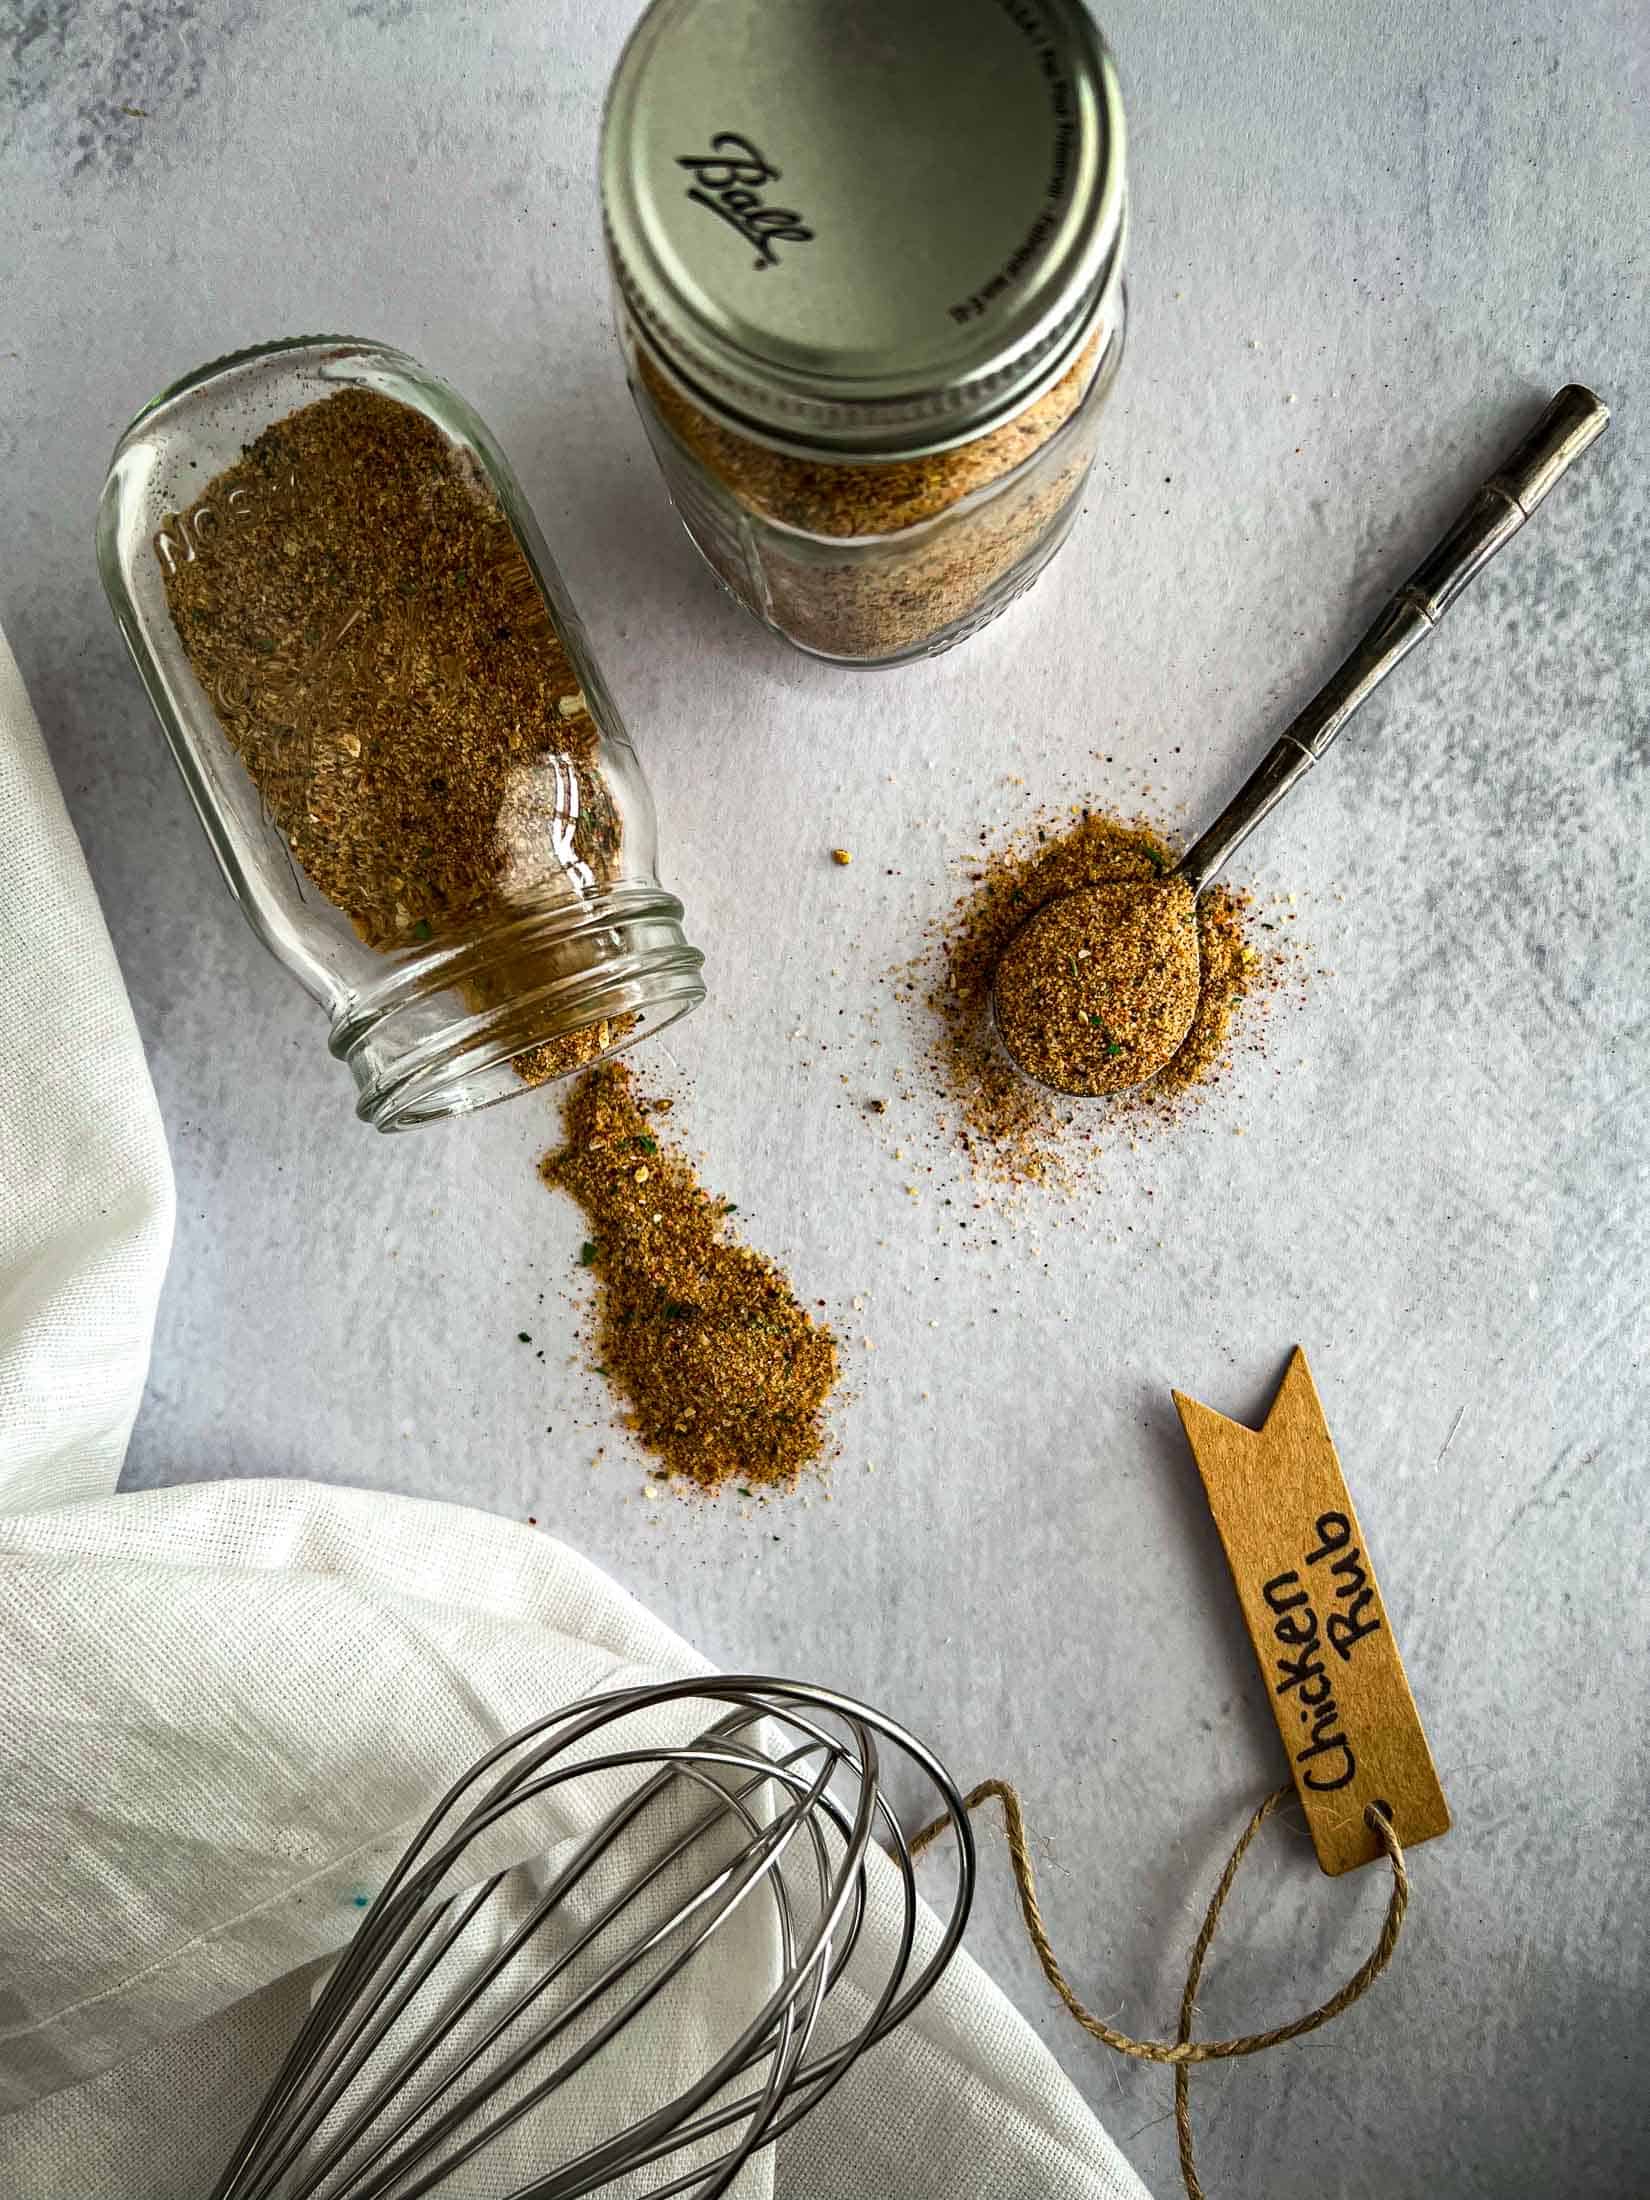 Smoked chicken rub spilling out of a spice jar with a metal spoon full of rub.